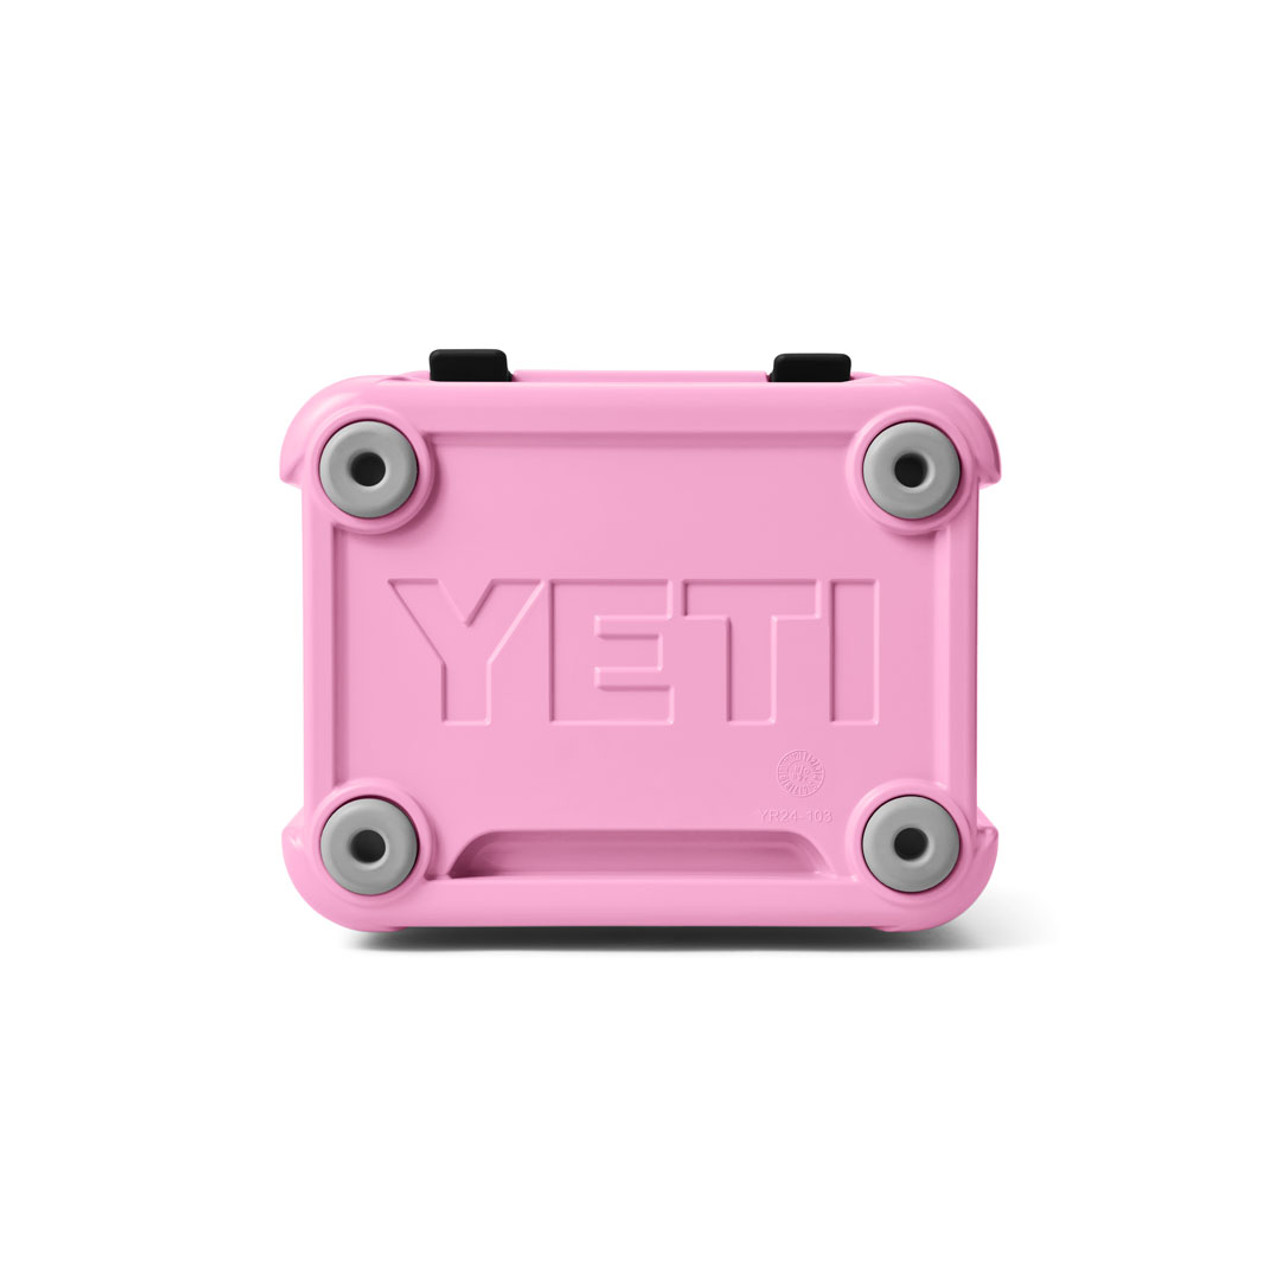 https://cdn11.bigcommerce.com/s-ppsyskcavg/images/stencil/1280x1280/products/68657/248018/YETI_Wholesale_Hard_Coolers_Roadie_24_Power_Pink_Bottom_3494_B_2400x2400__69031.1694631556.jpg?c=2?imbypass=on